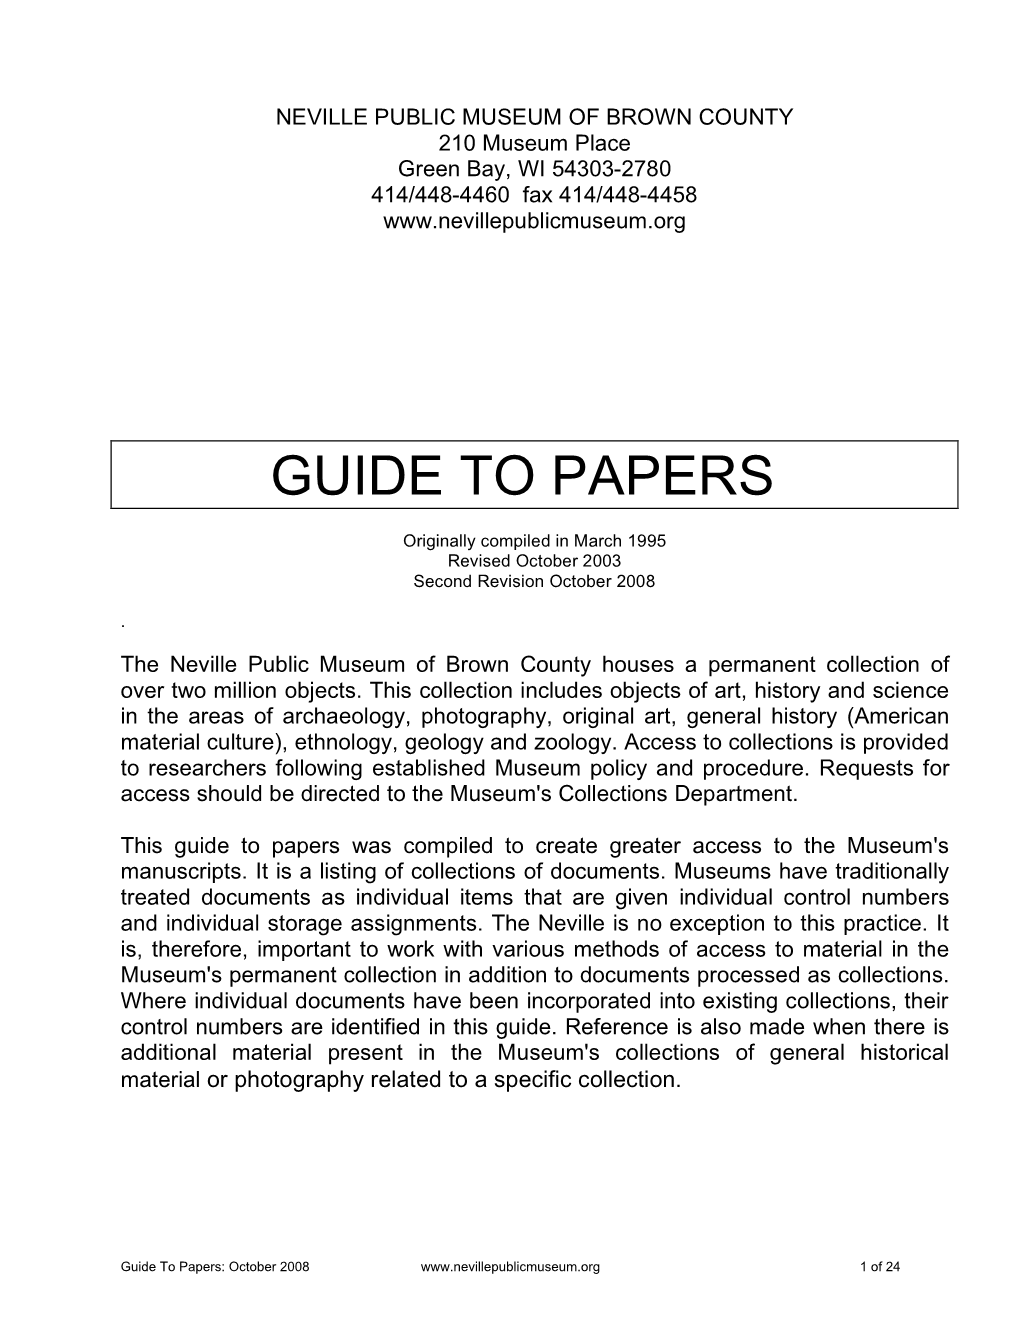 Guide to Papers